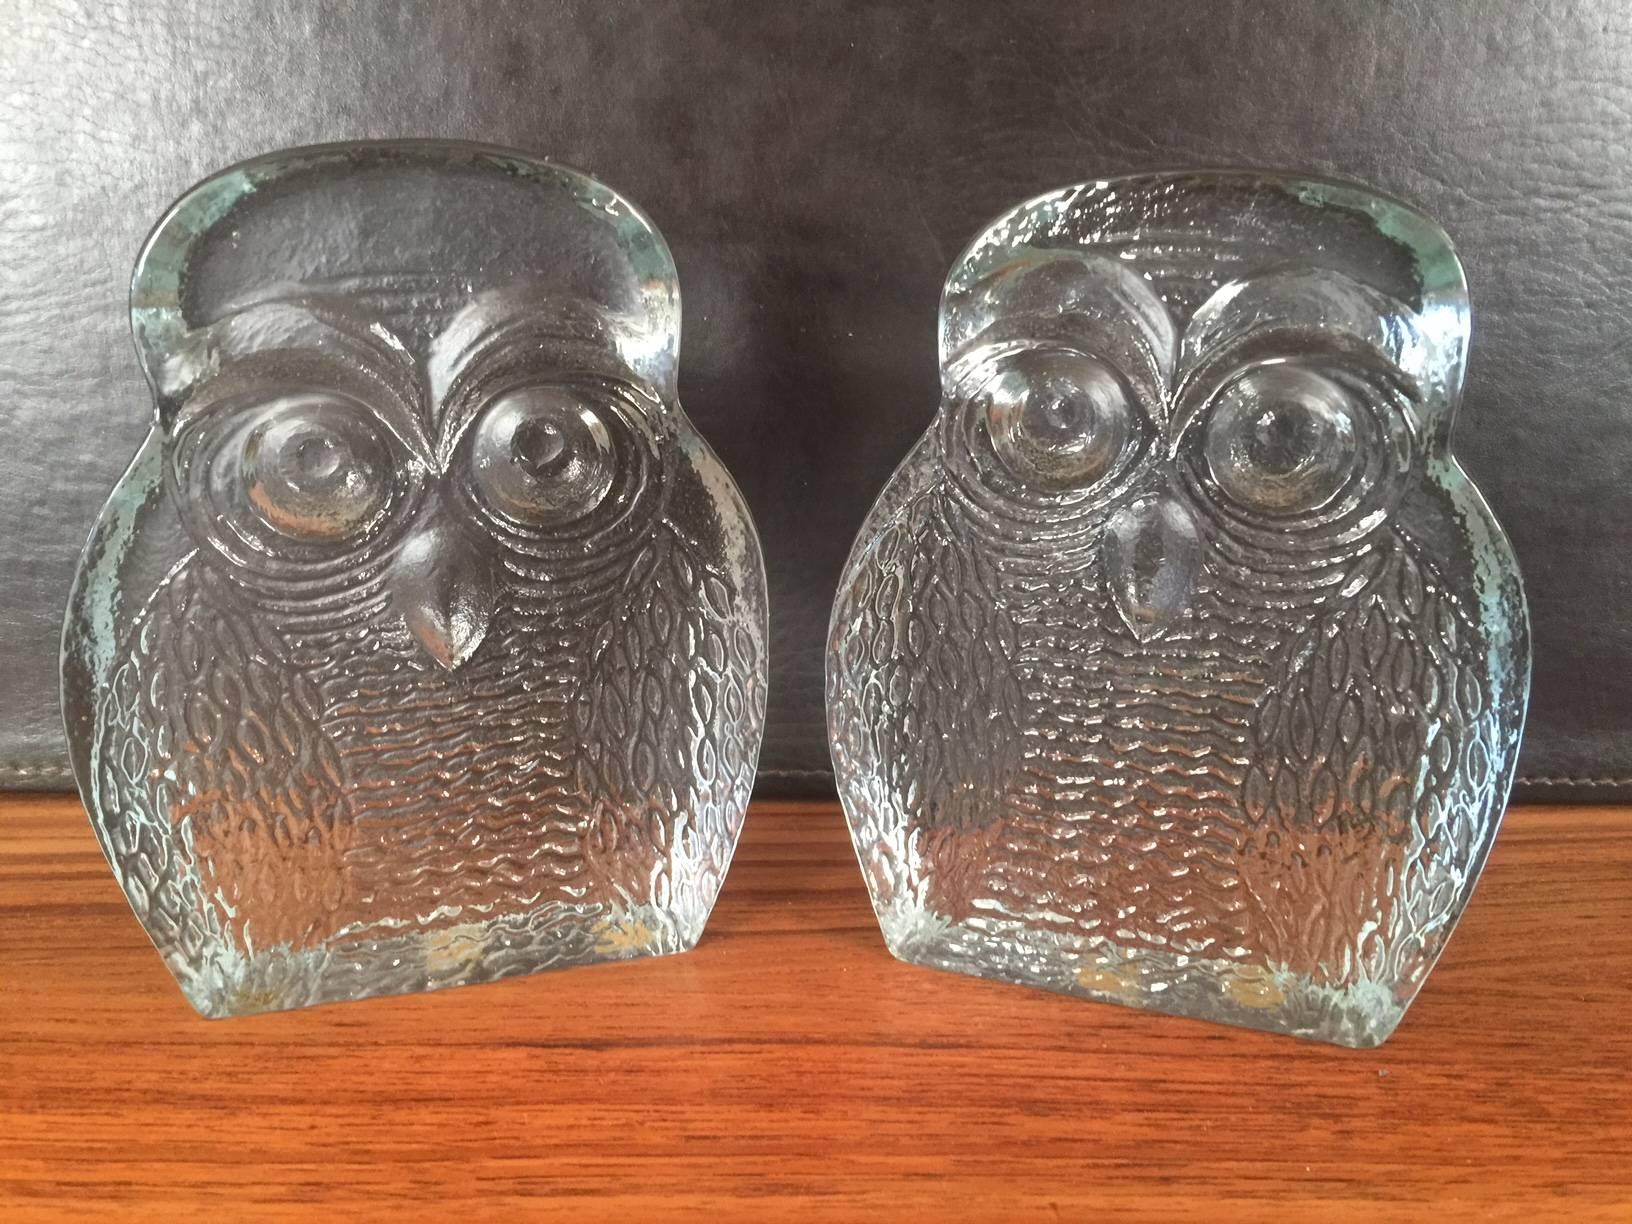 Midcentury pair of handblown owl bookends by Blenko, circa 1960s. The bookends are heavy and solid with a smooth back side a finish and a textural finish on the front. Very cool decorative item.  #331